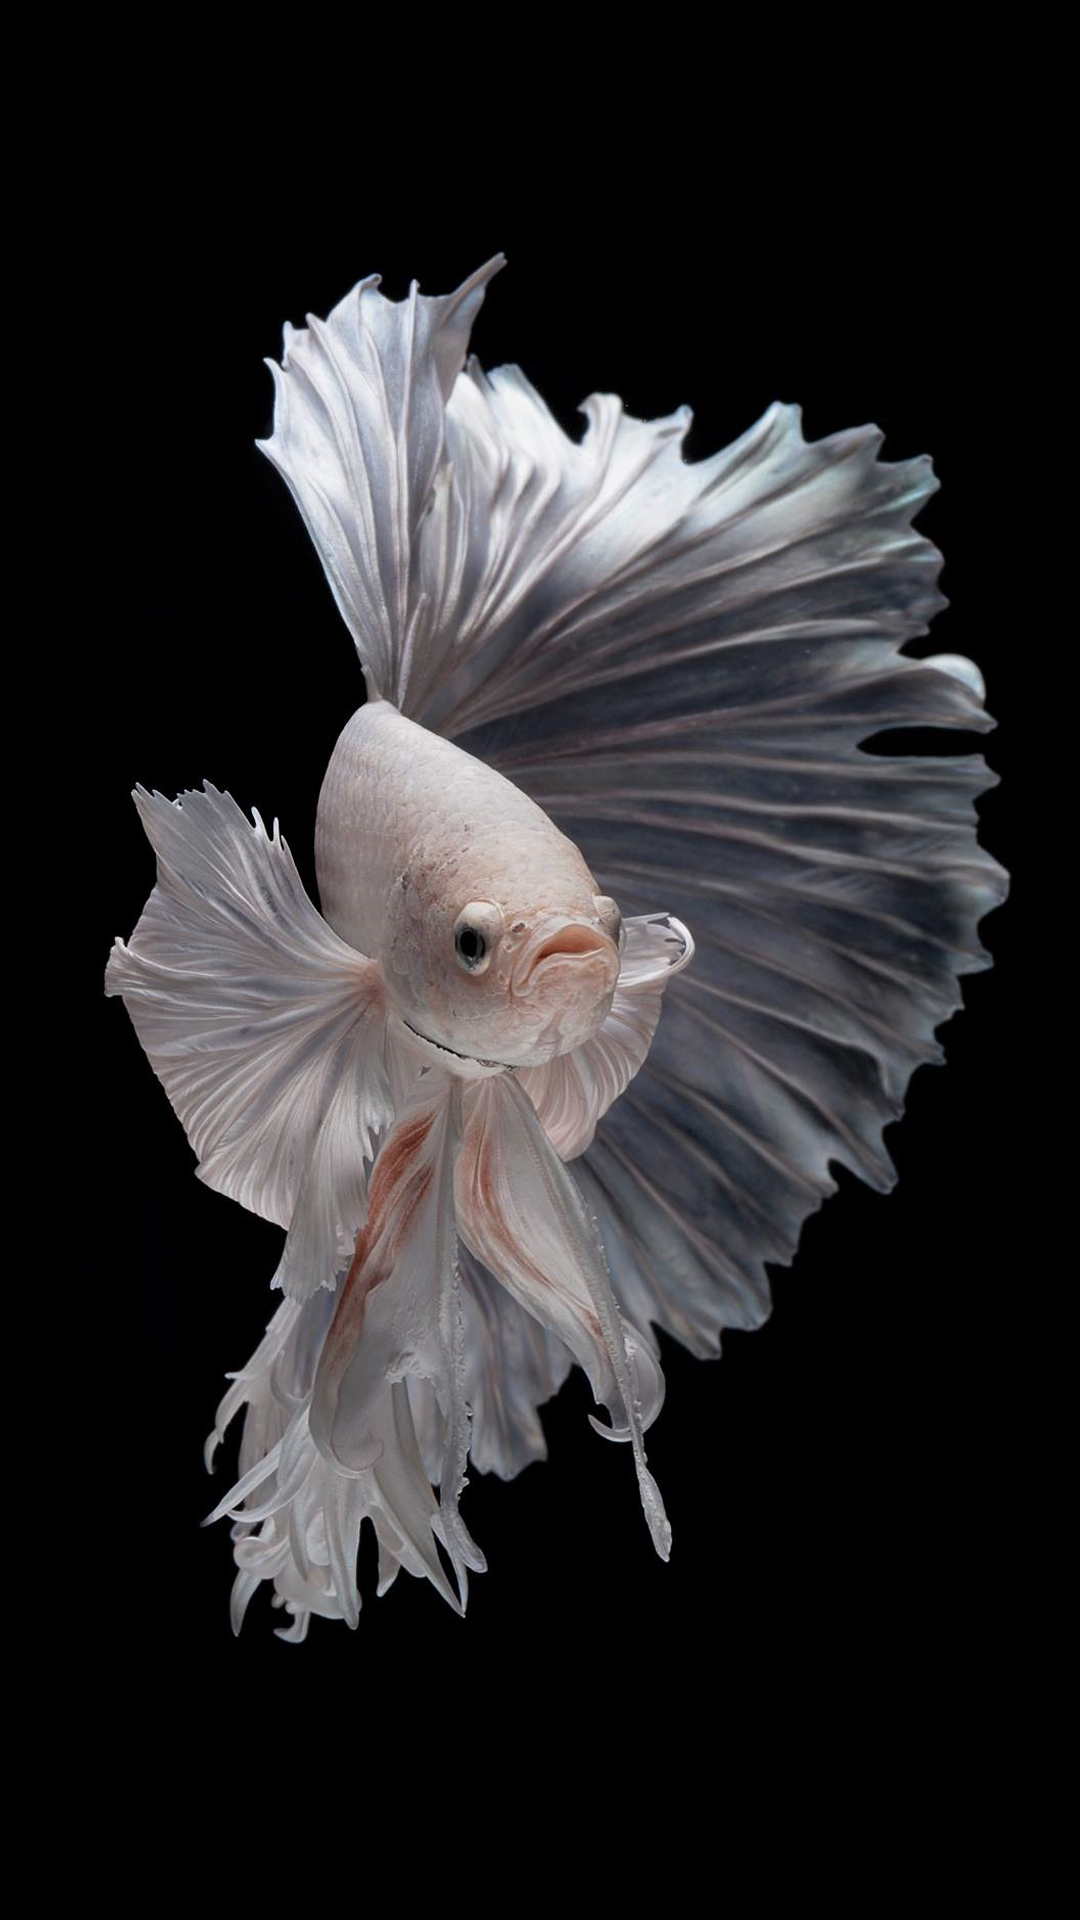 Free Wallpaper for iPhone 7 Plus with Albino Betta Fish Picture (13 of 20 Pics) Wallpaper. Wallpaper Download. High Resolution Wallpaper